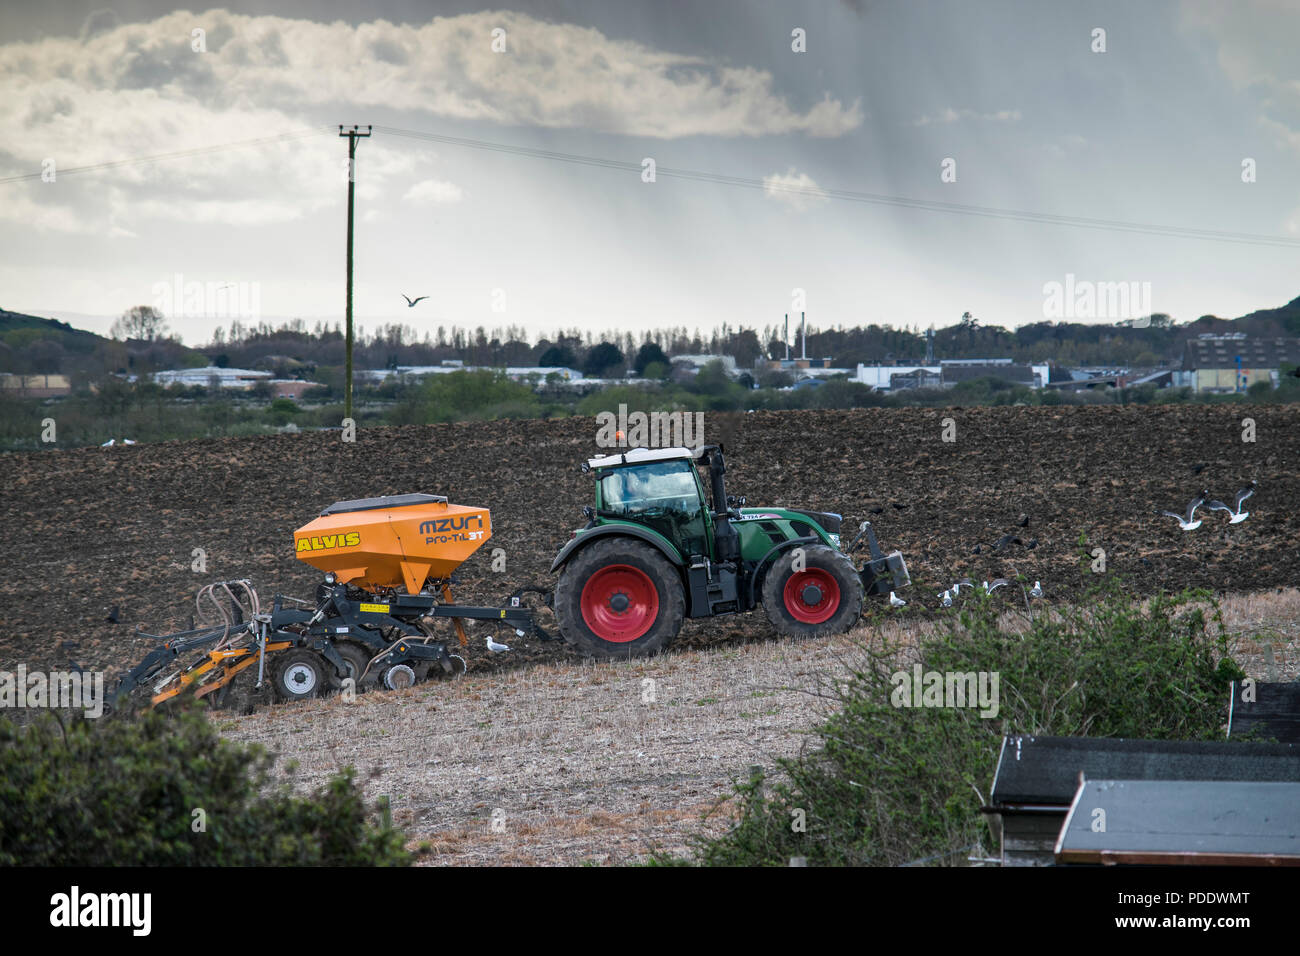 Tractor pulling agricultural machinery across a field with birds feeding in the disturbed soil. Rain is falling in the distance. Stock Photo